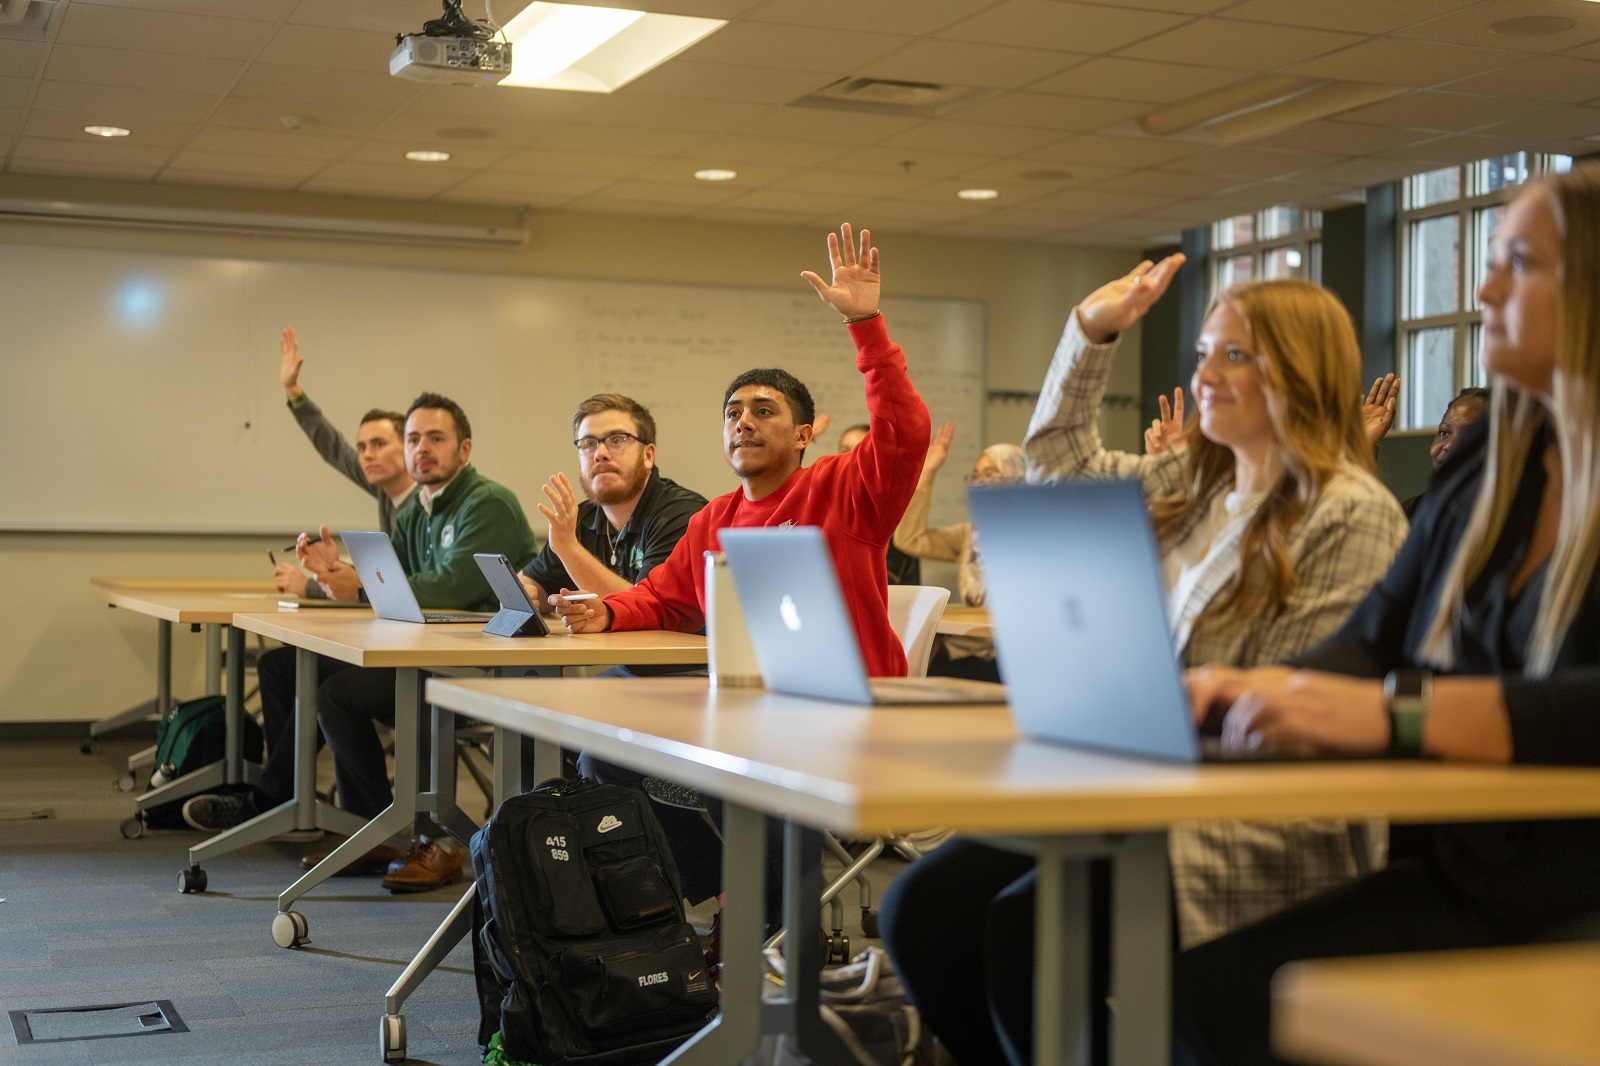 Students are shown listening to an instructor and raising their hands